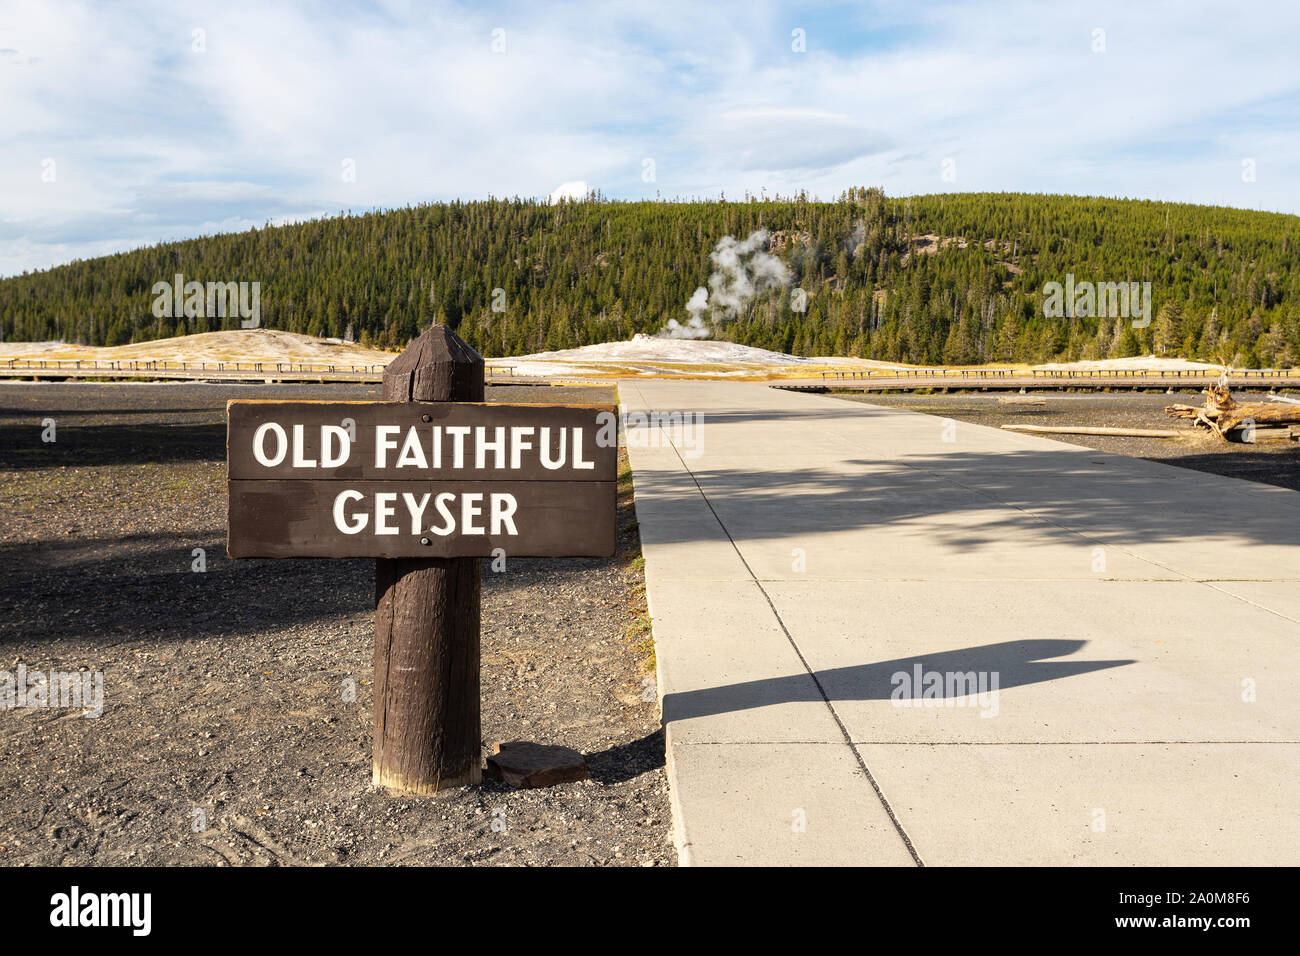 Old Faithful Geyser sign at Yellowstone National Park with steam emitting from the geyser in the background. Stock Photo